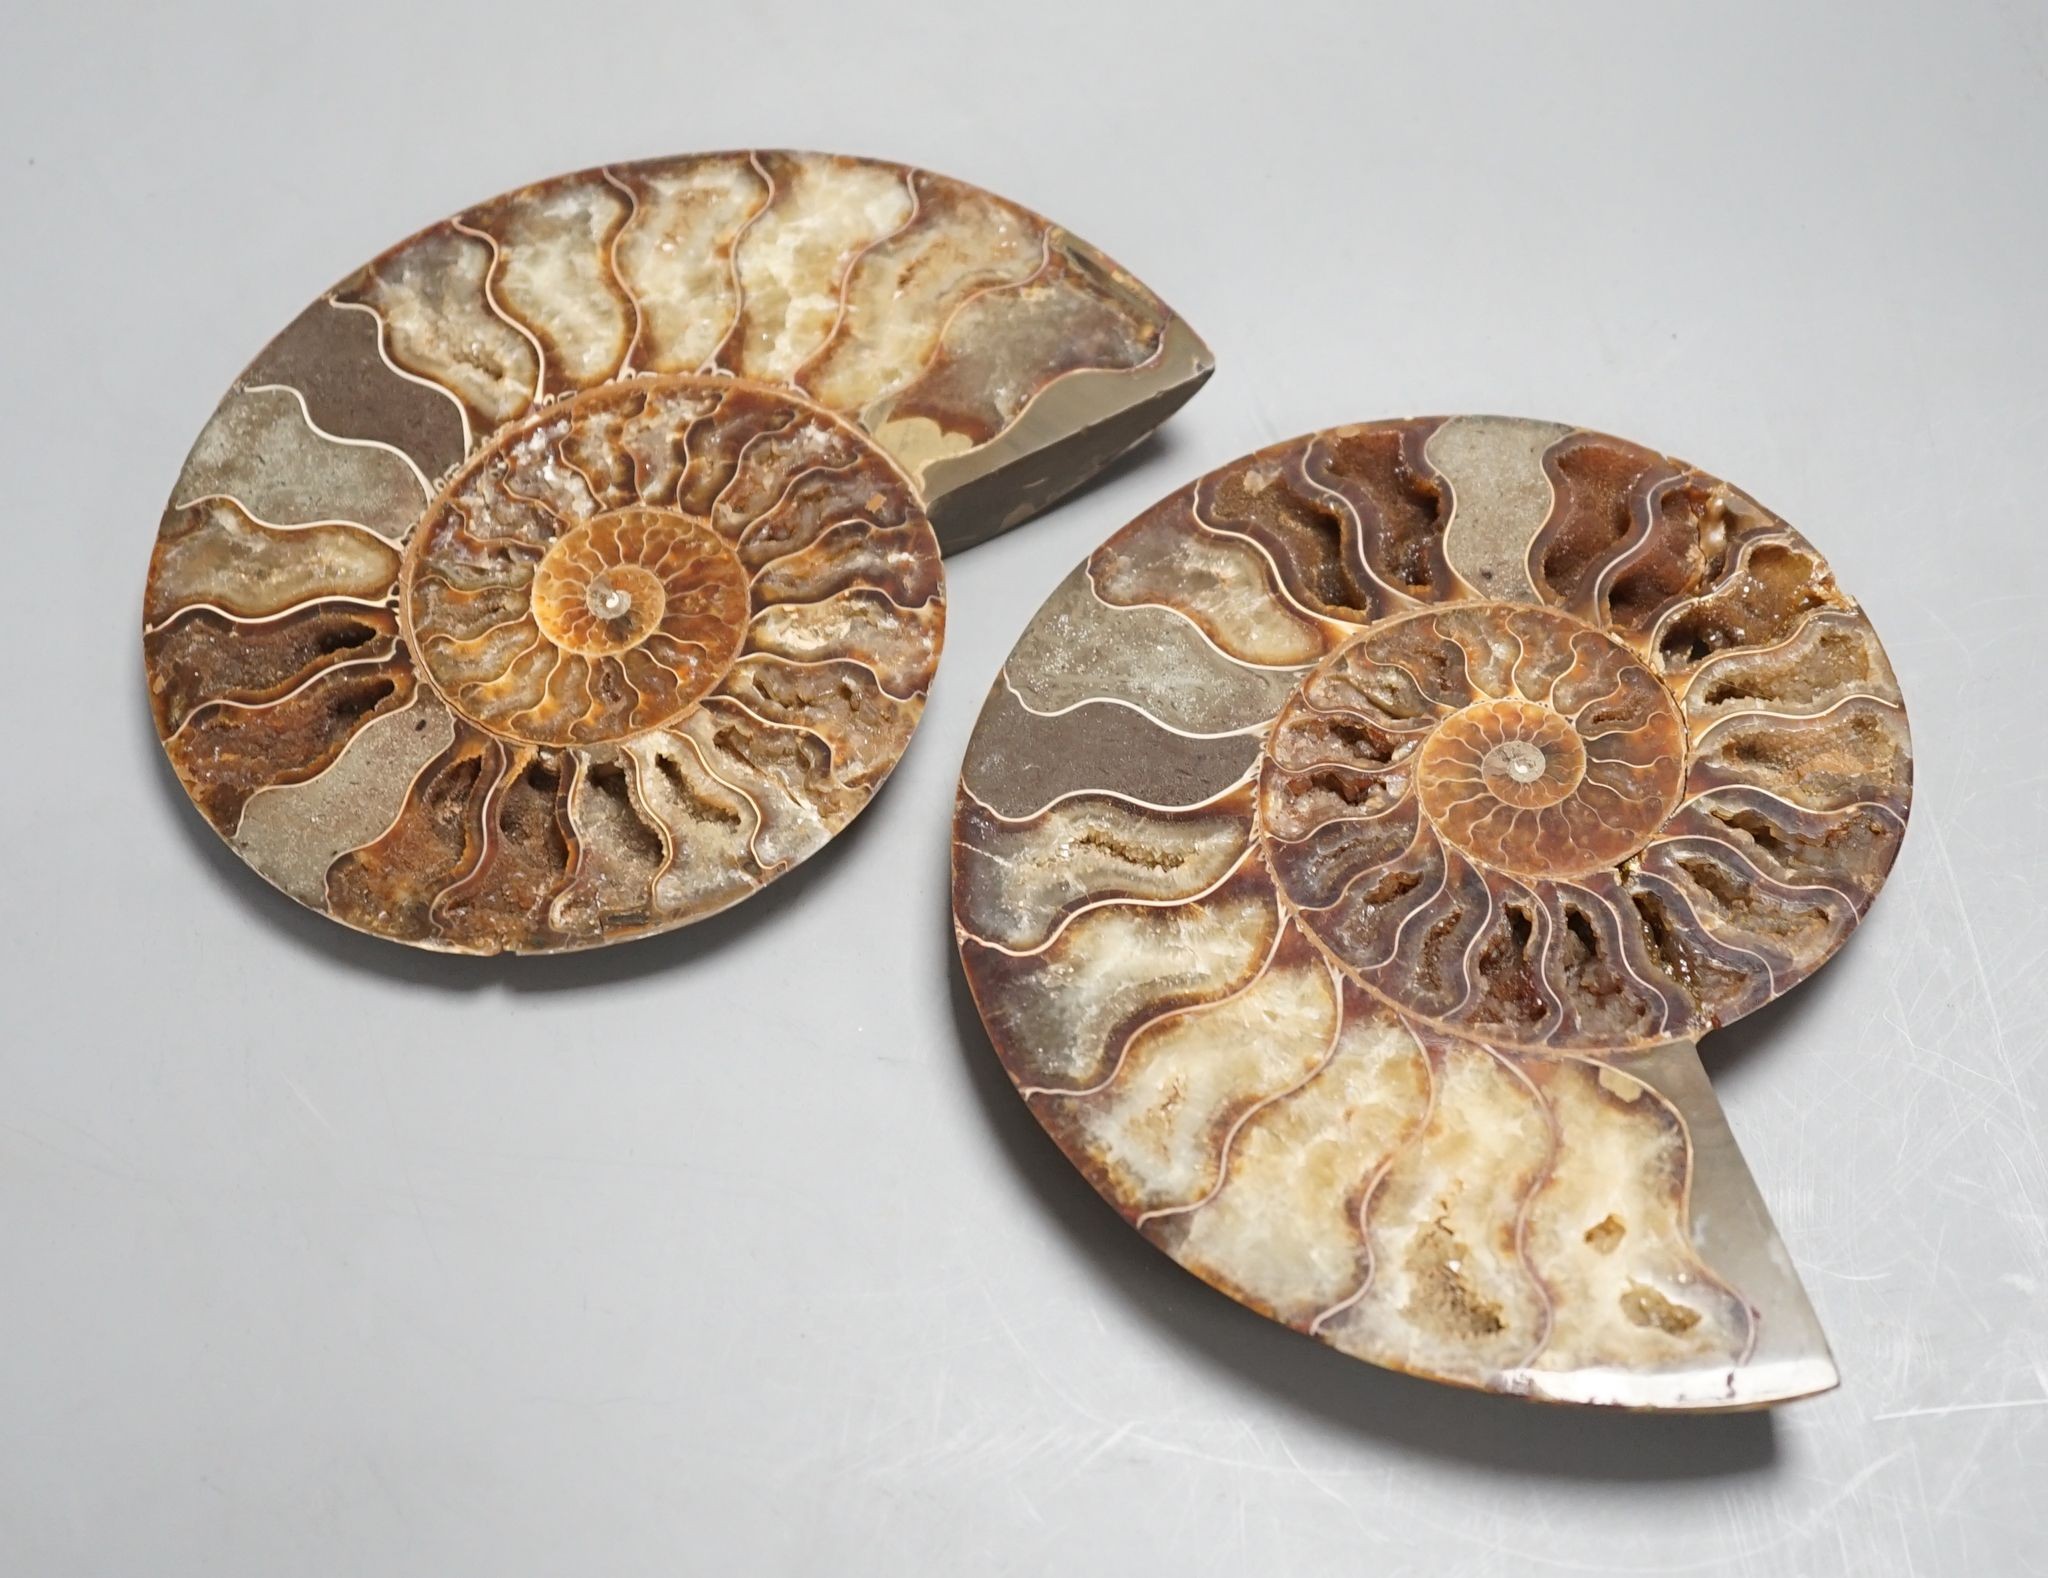 A polished hardstone ammonite fossil, in two halves